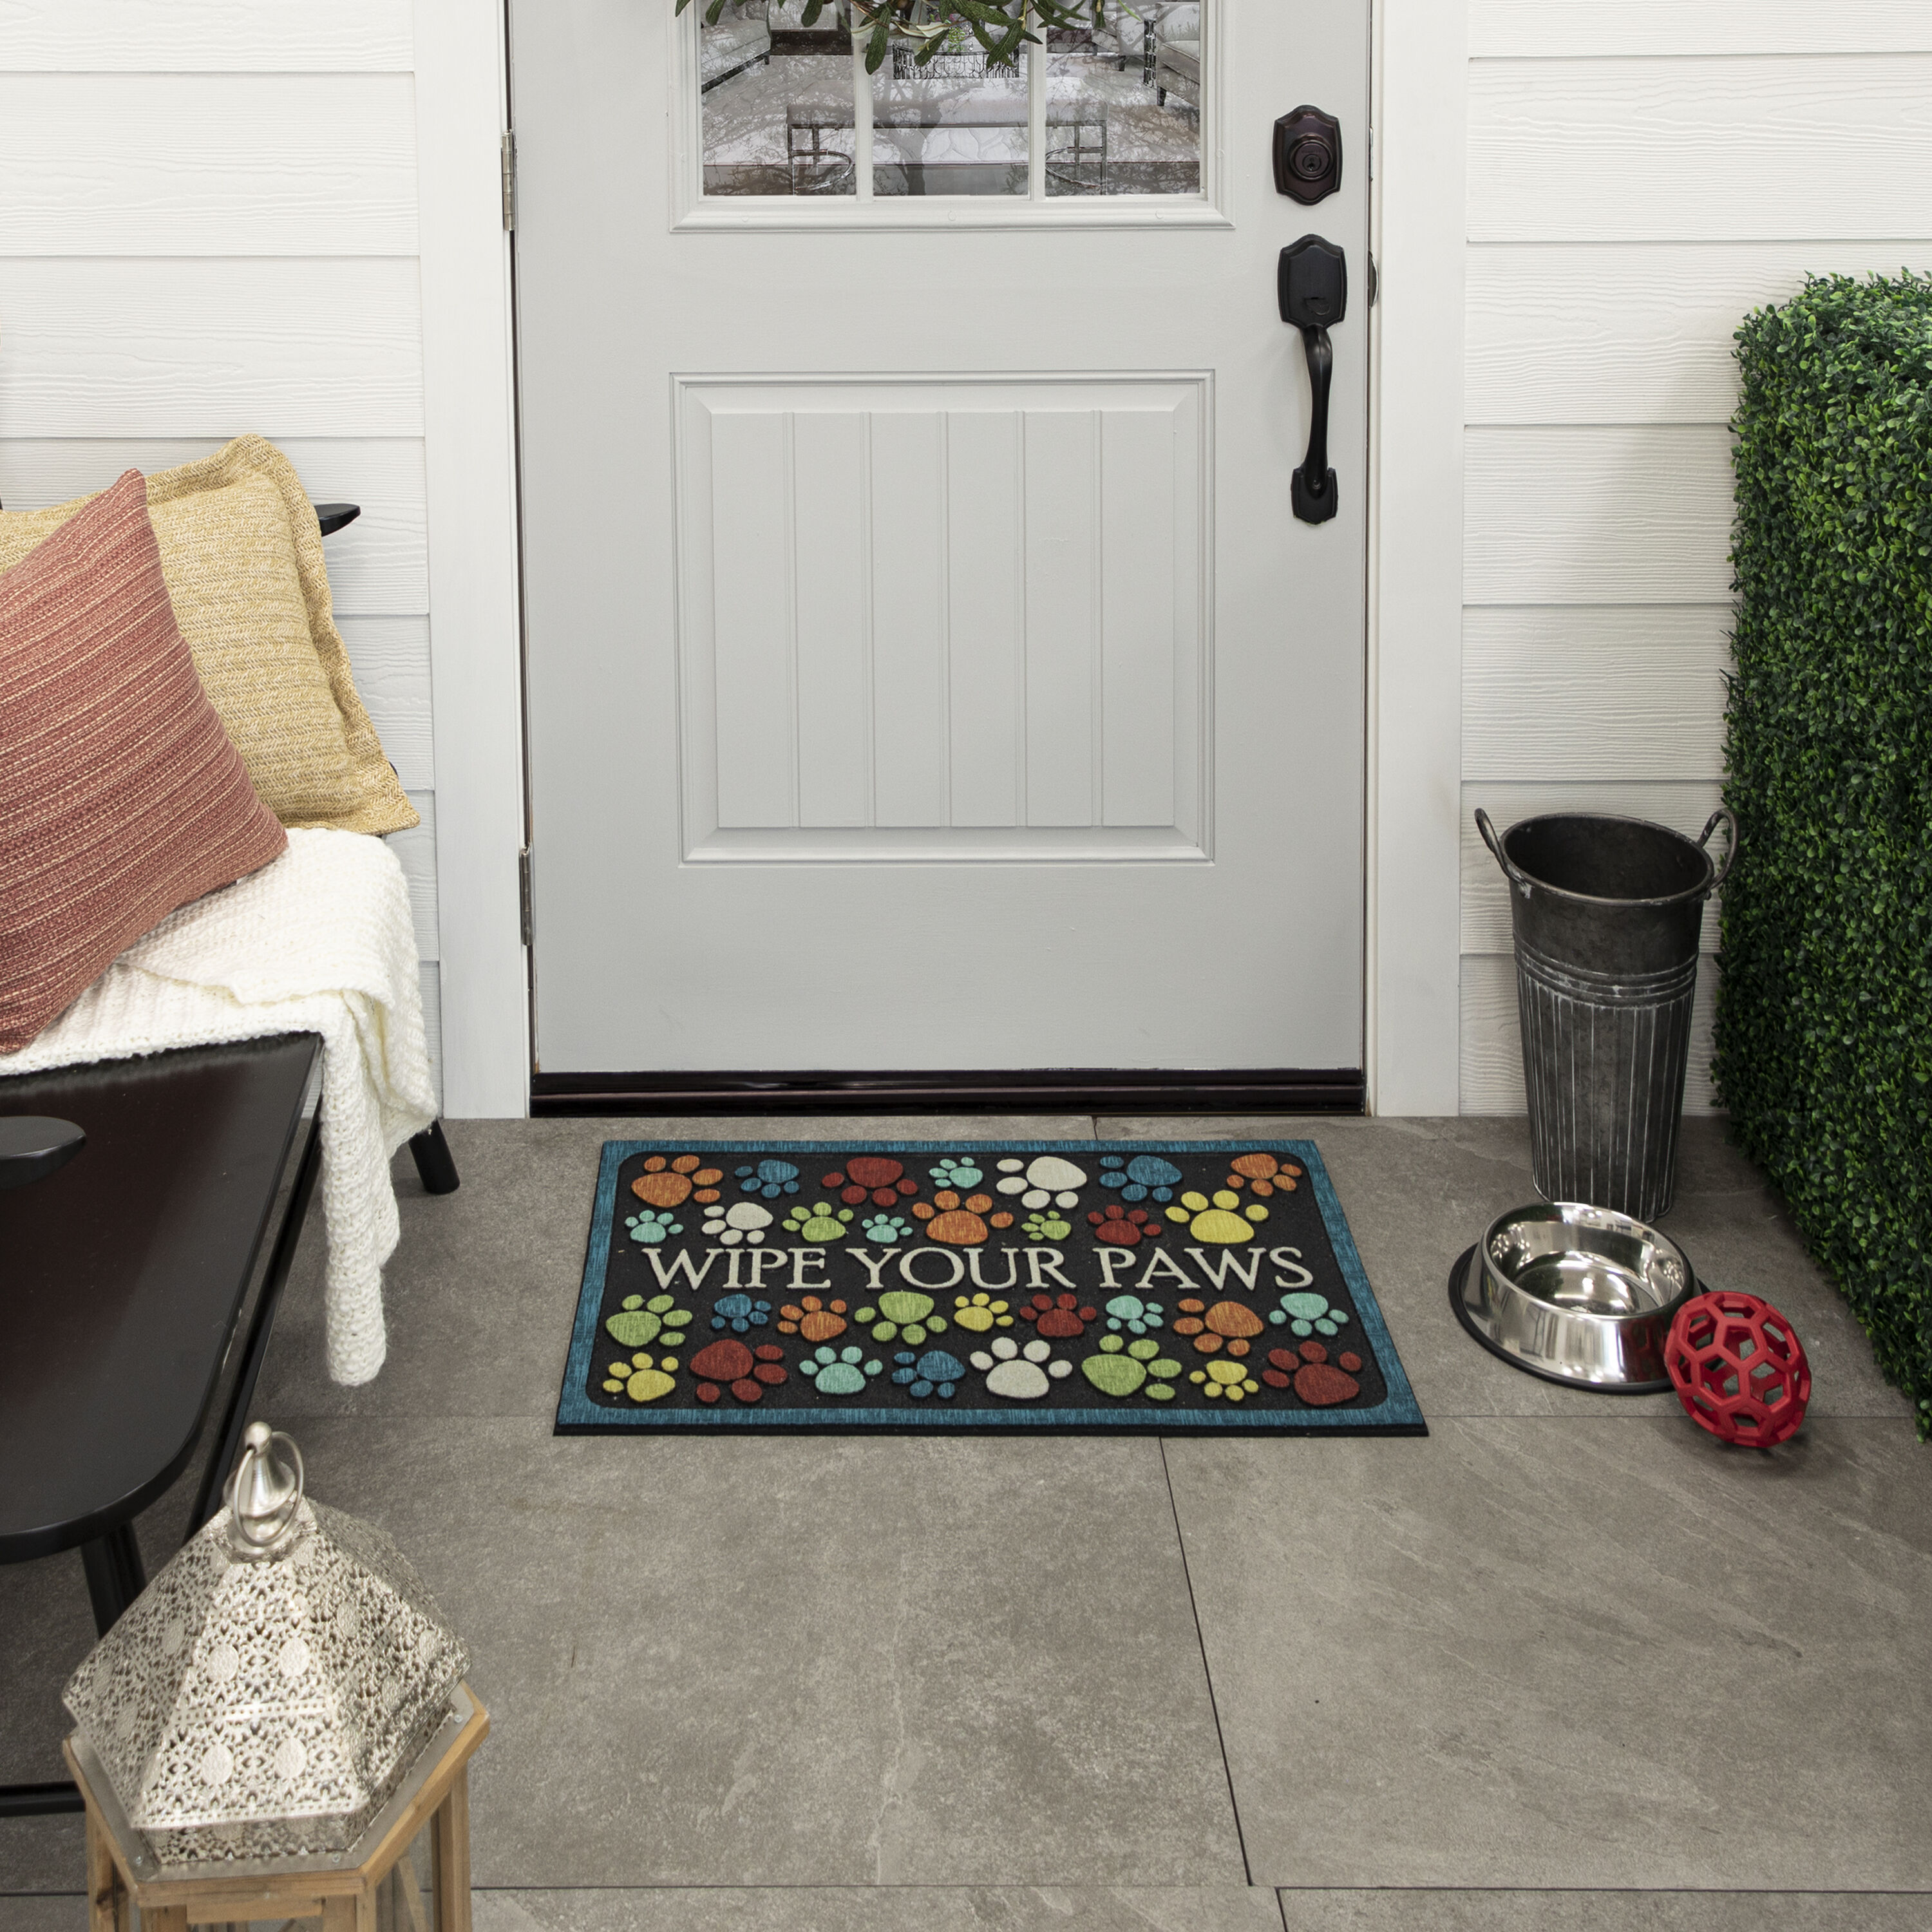 allen + roth 2-ft x 3-ft Multiple Colors/Finishes Rectangular Outdoor Door  Mat in the Mats department at